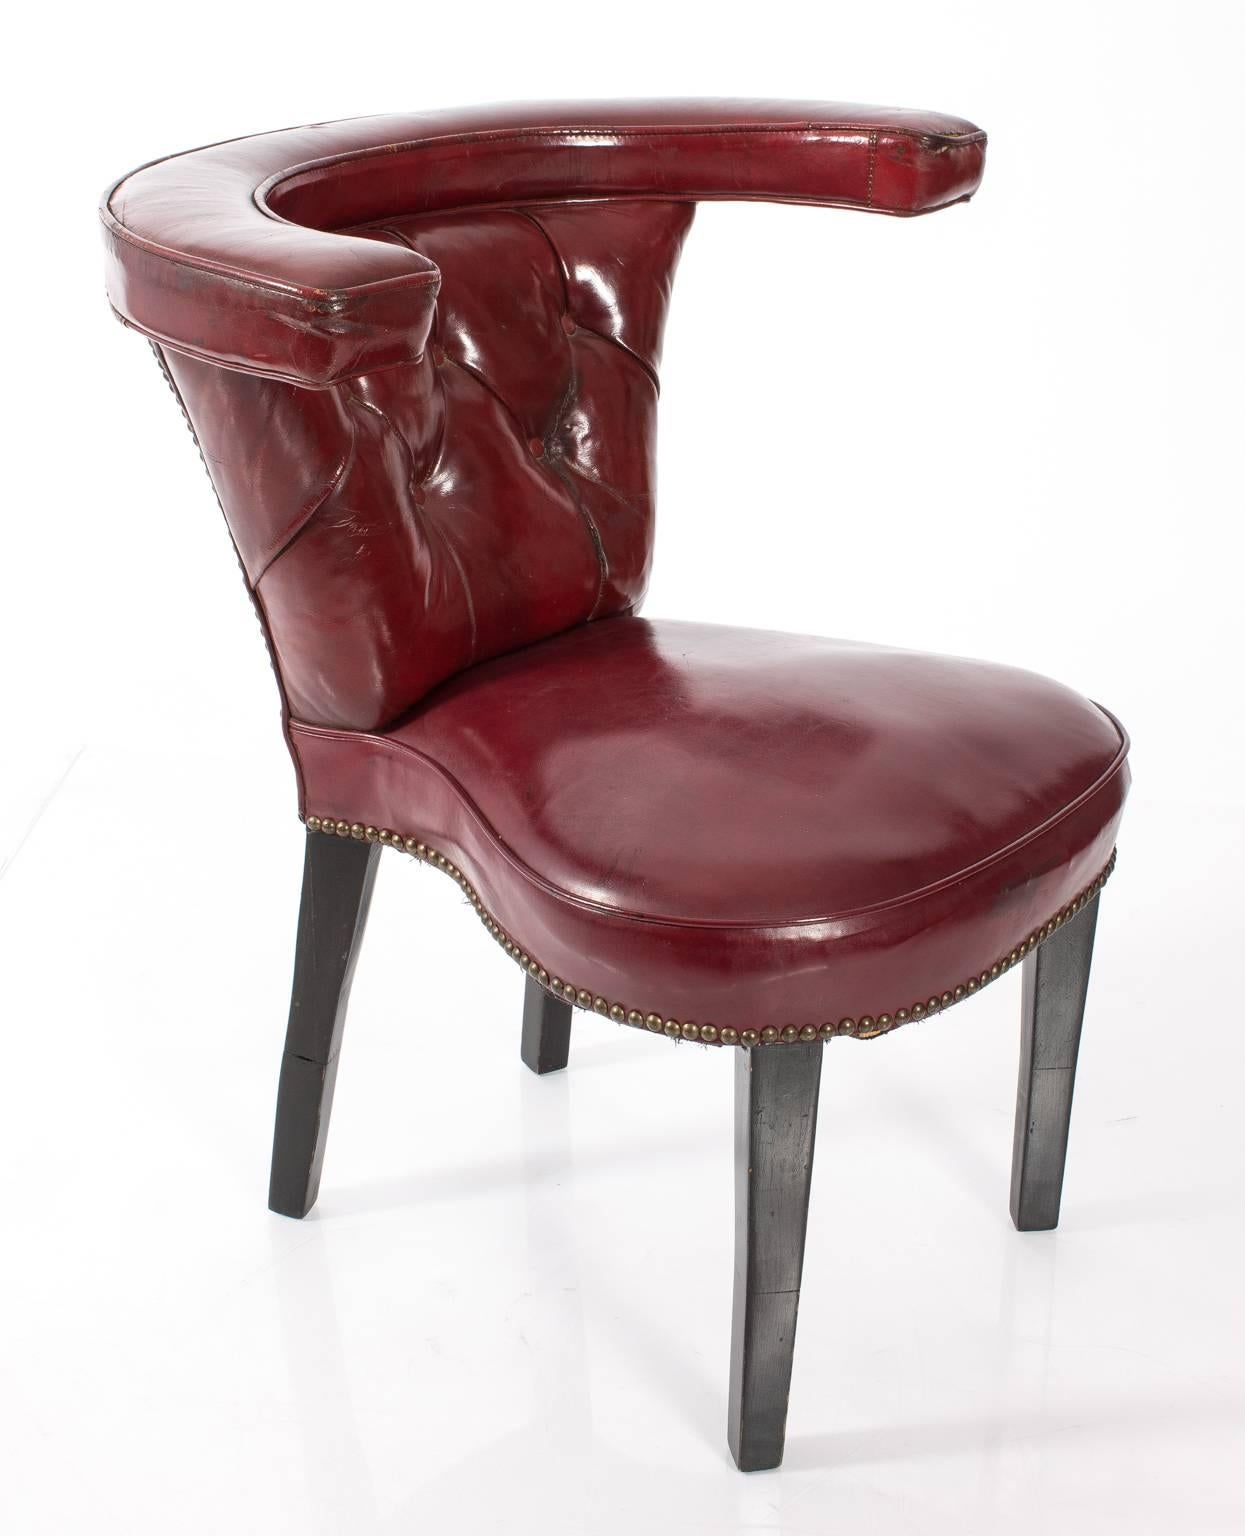 Red leather side chair, circa 1900.